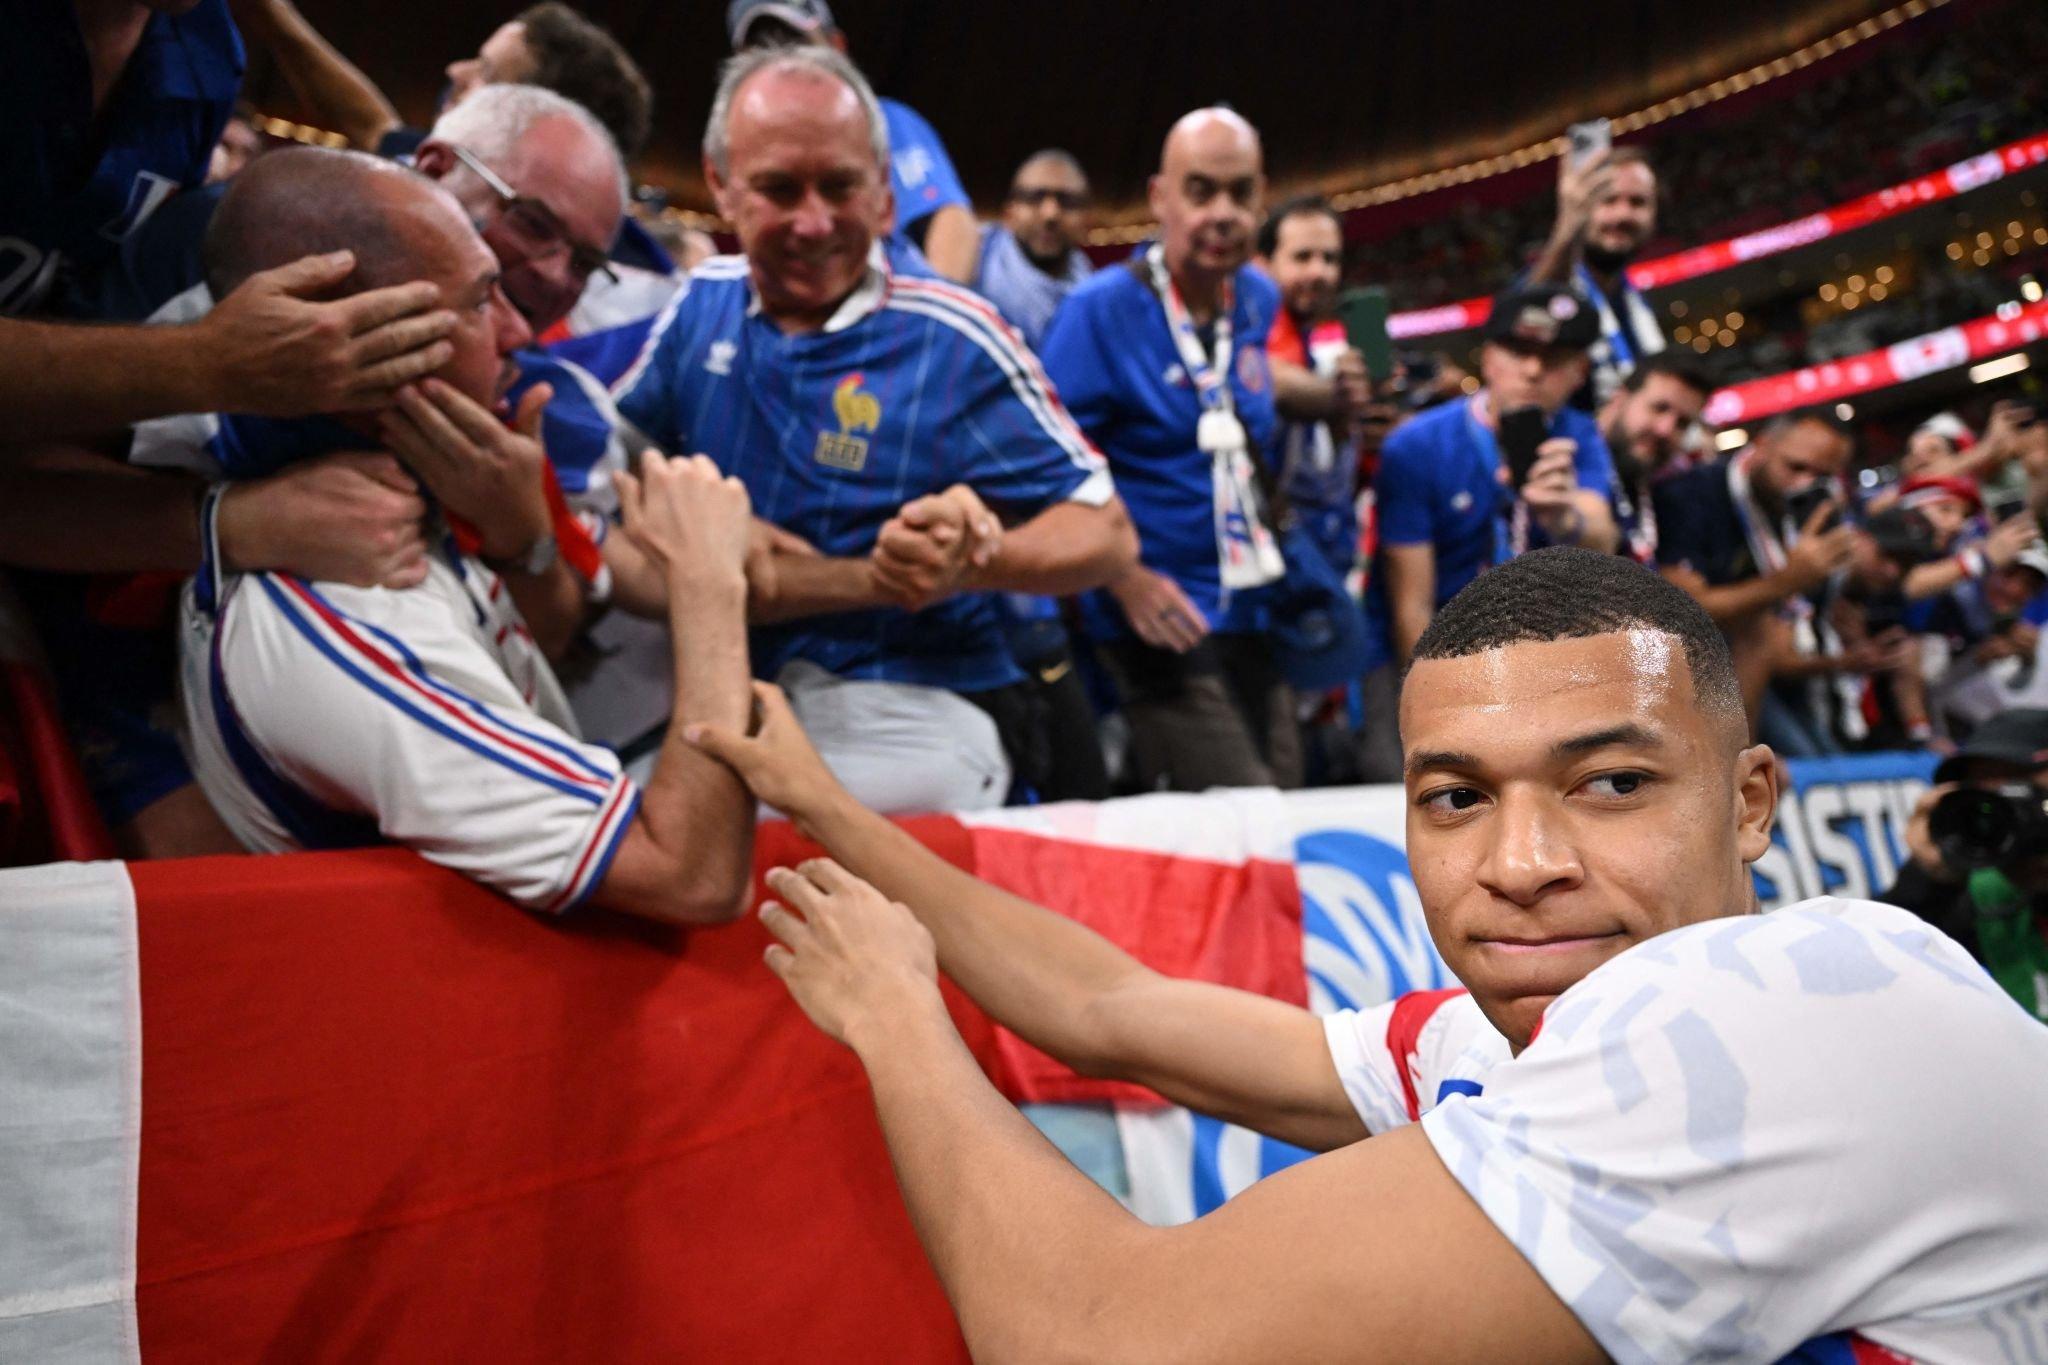 Kylian Mbappe apologizes after his shot hits France fan ahead of FIFA World Cup semis vs Morocco: Watch